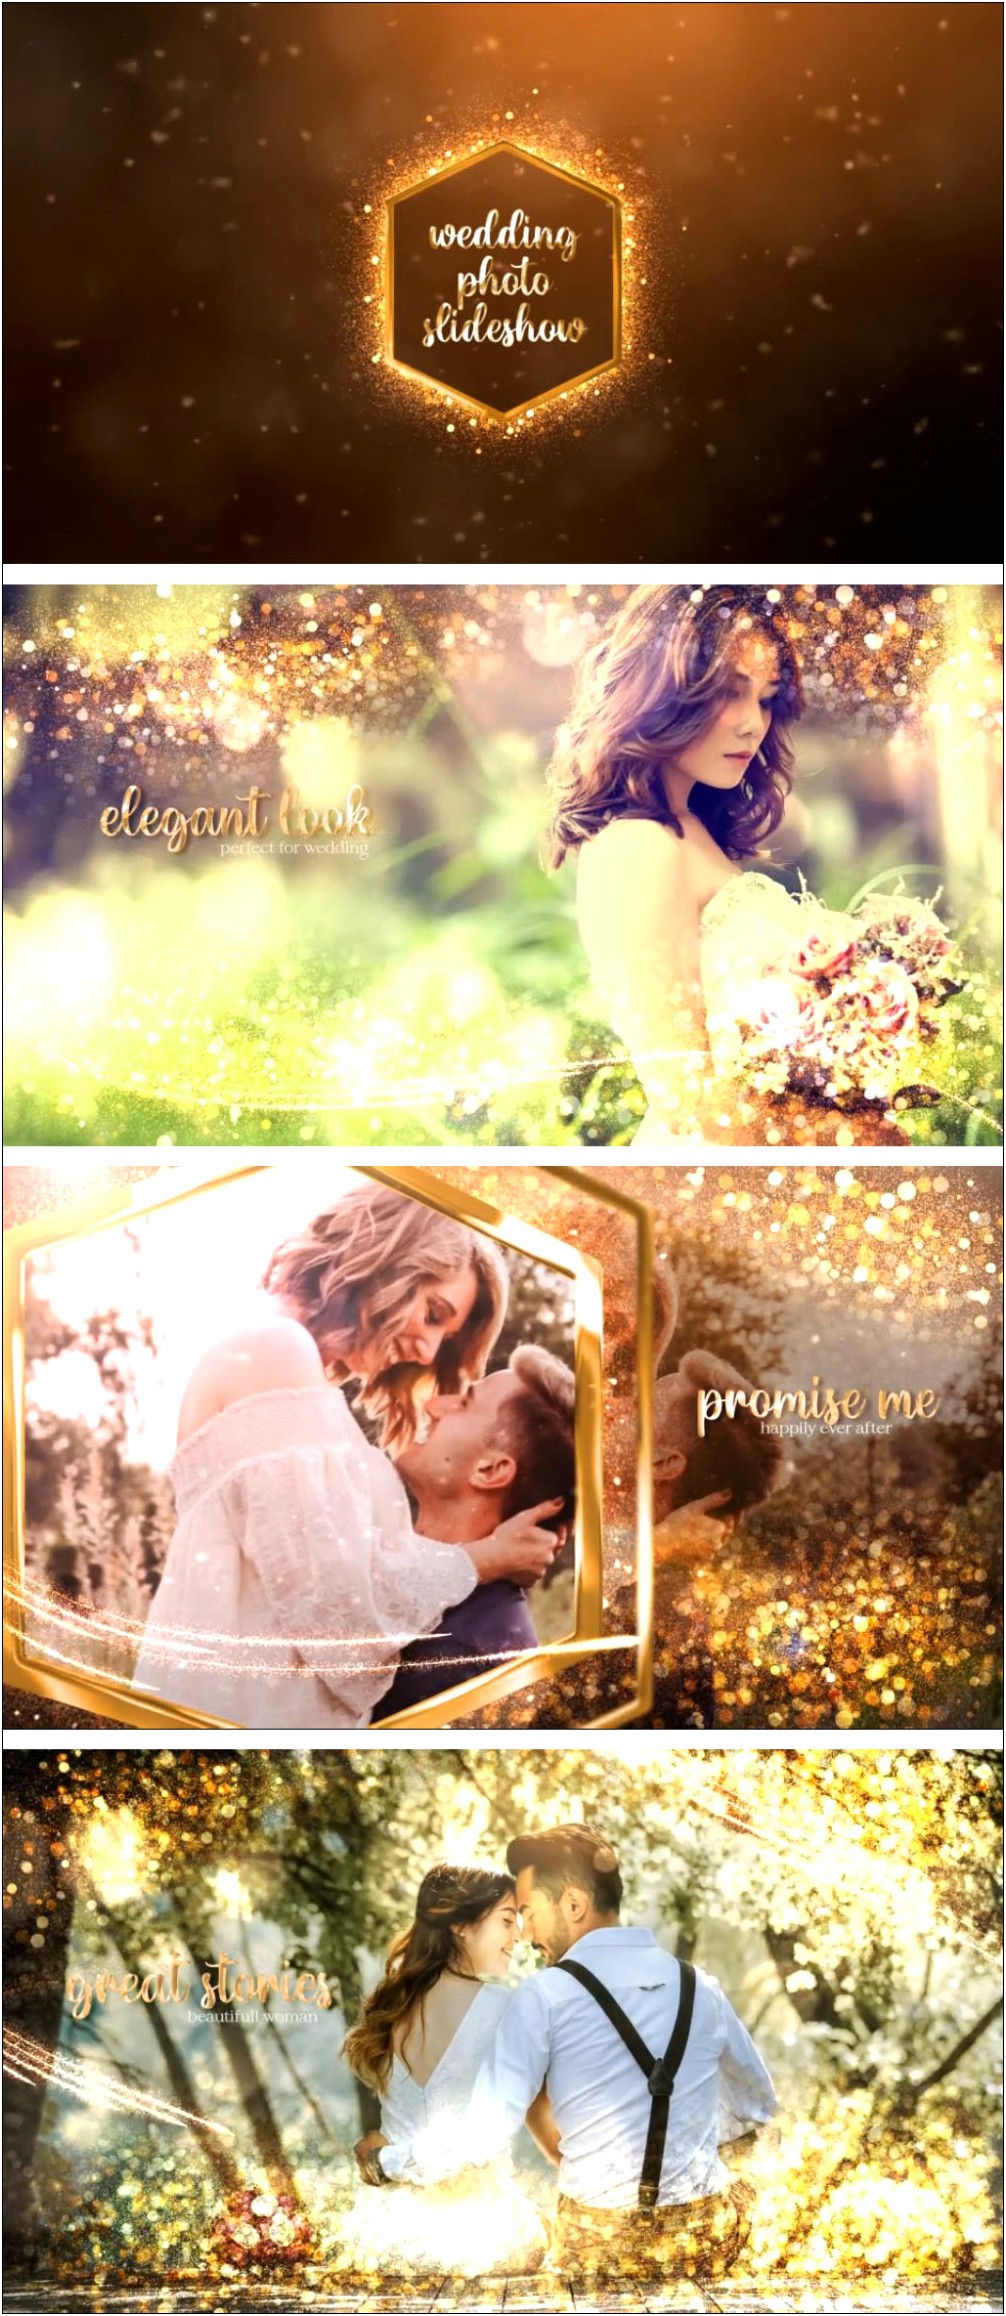 After Effect Wedding Slideshow Template Free